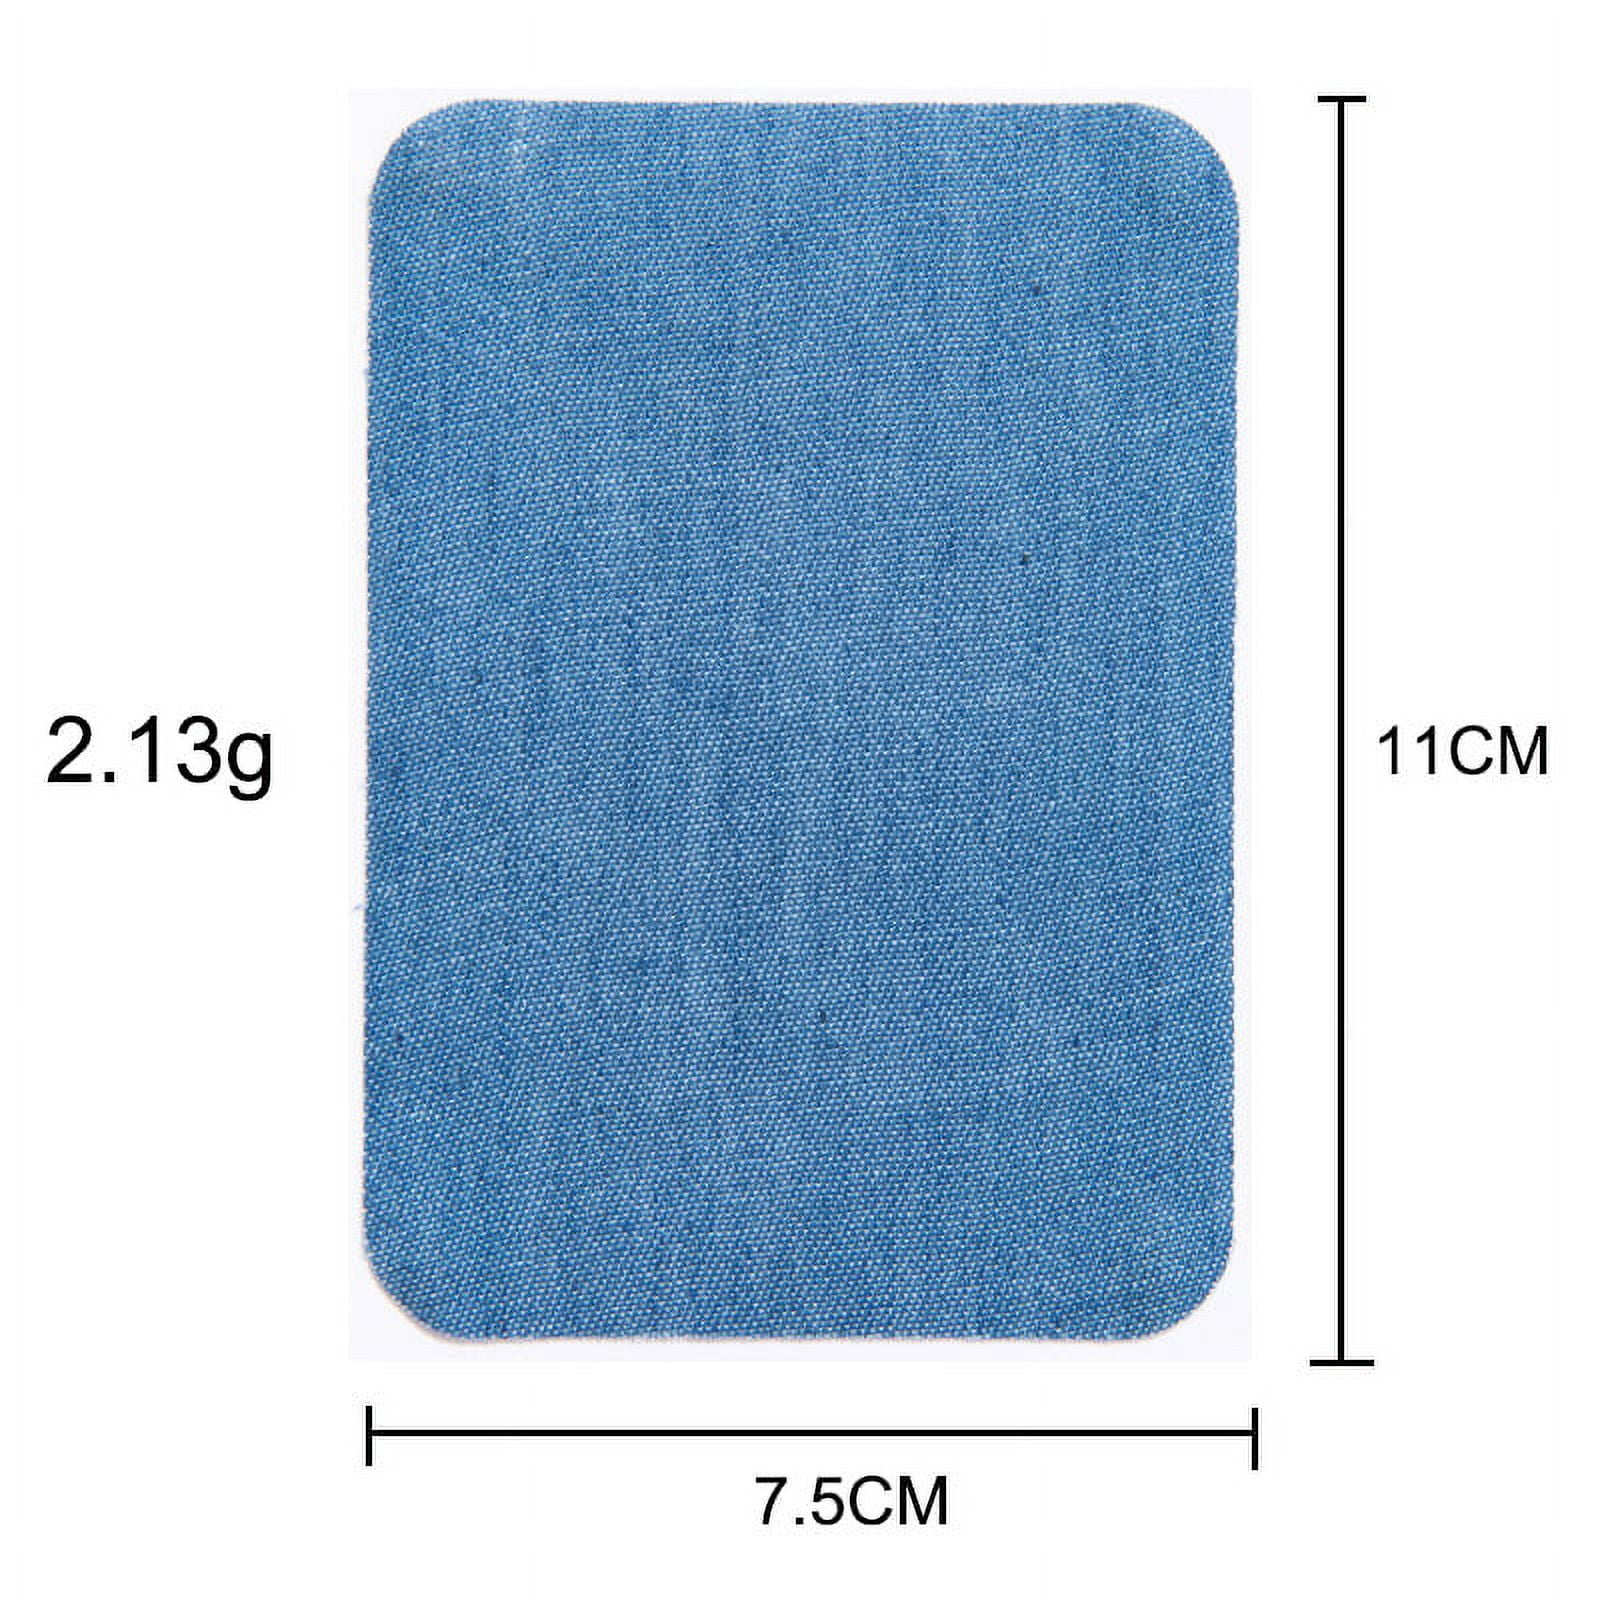 Phonesoap Denim Iron on Jean Patches Inside & Outside Strongest Glue Assorted Shades of Blue Repair Decorating 2.75 inch D